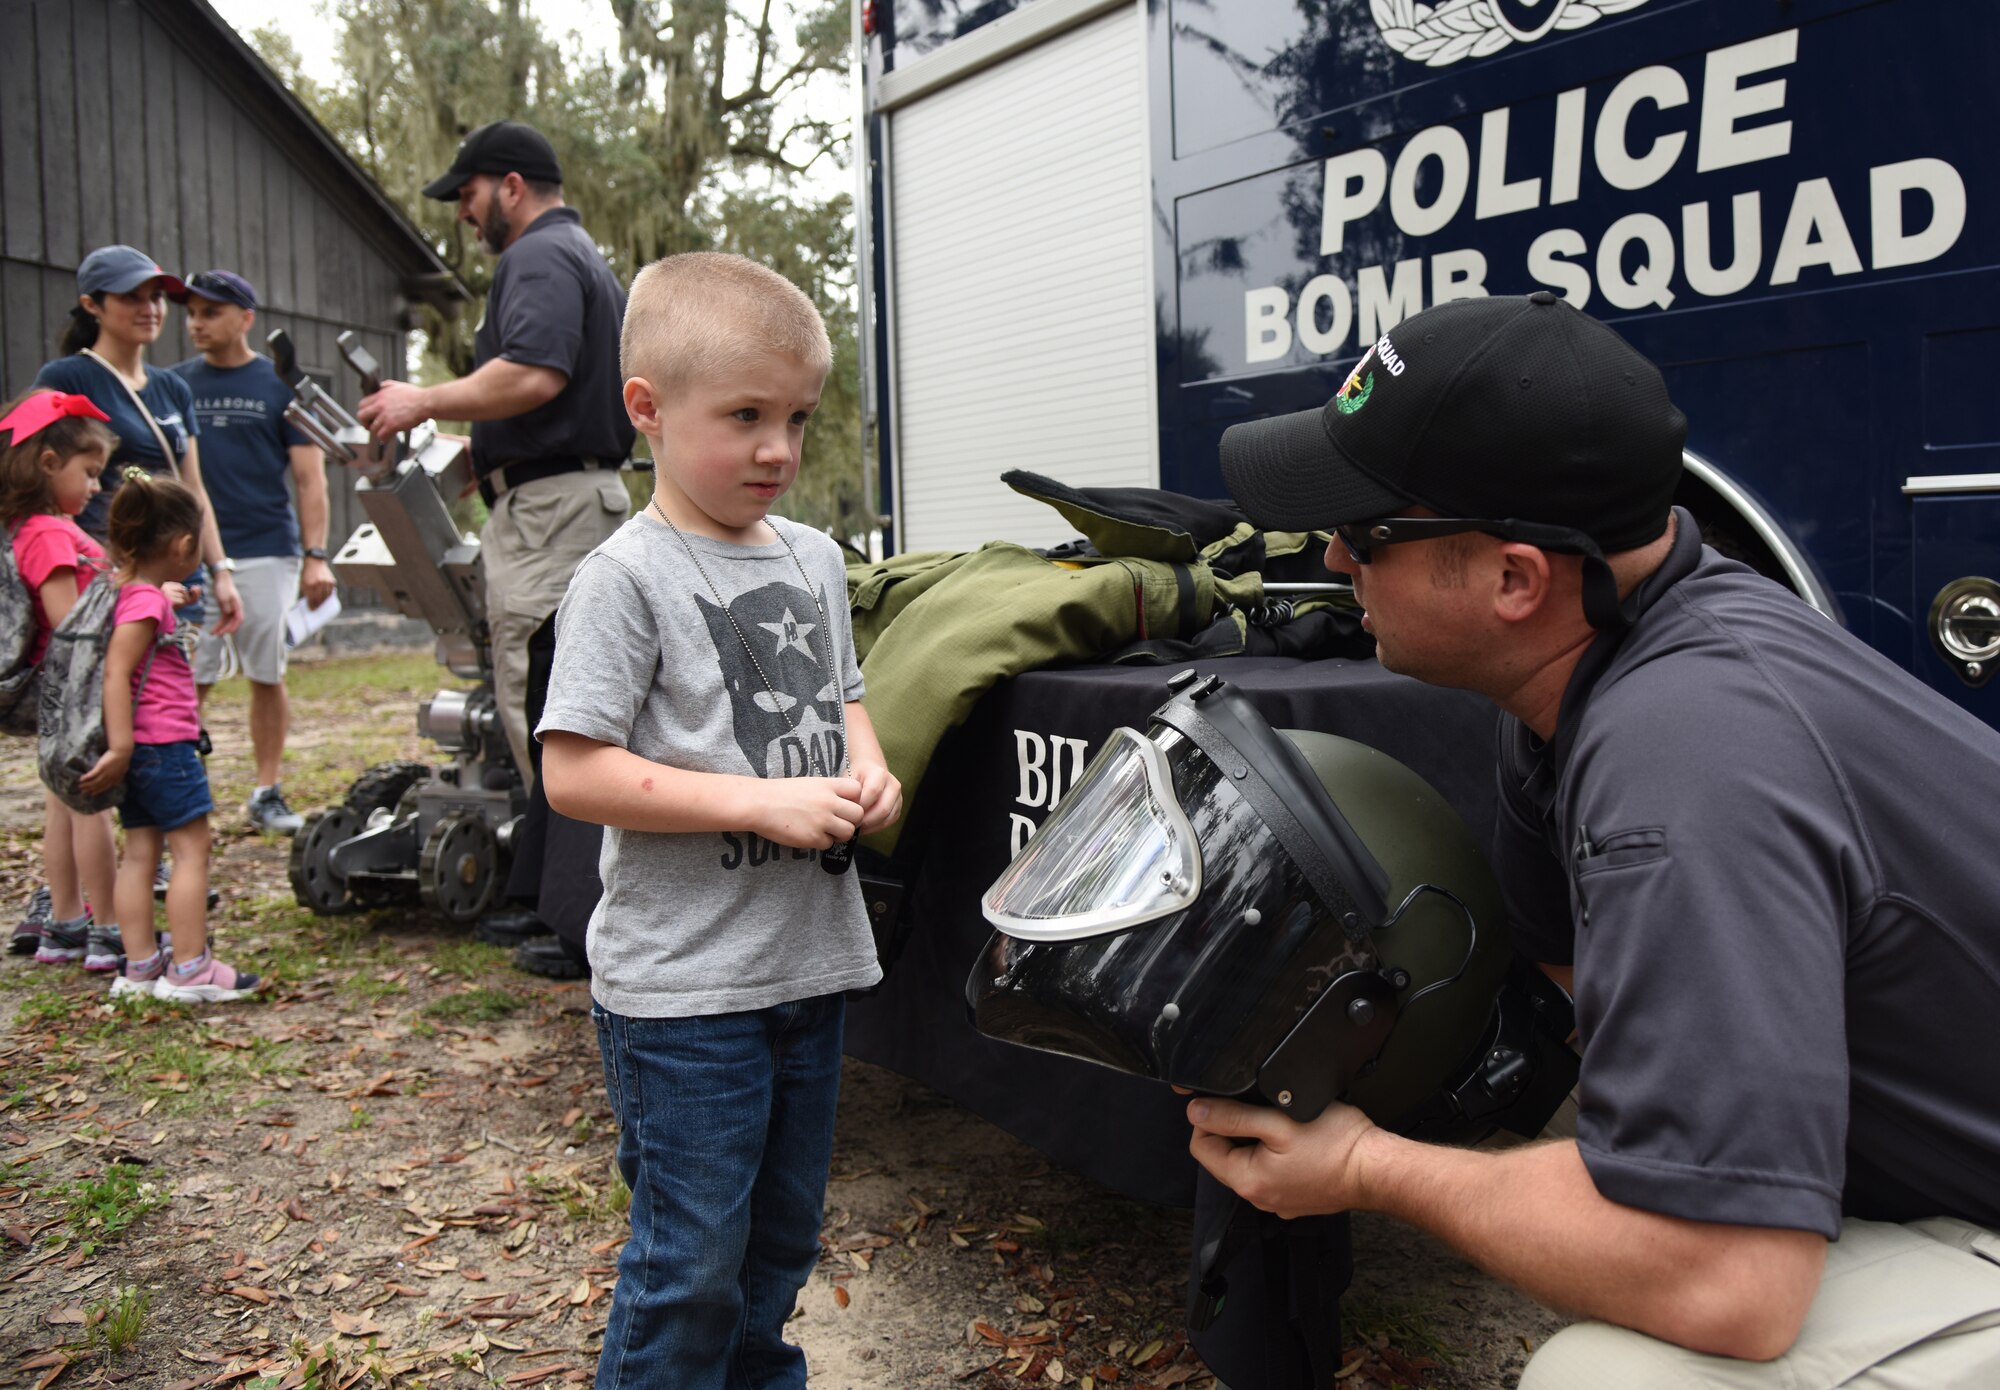 Sergeant Matthew Boone, Biloxi Bomb Squad technician, shows a protective helmet worn by his team members to Mason Taykowski, son of U.S. Air Force Tech. Sgt. Justin Taykowski, 338th Training Squadron instructor, during Operation Hero at Keesler Air Force Base, Mississippi, April 6, 2019. The event, hosted by the Airman and Family Readiness Center in recognition of the Month of the Military Child, gave military children a glimpse into the lives of deployed military members. Children received Operation Hero dog tags and t-shirts as they made their way through the mock deployment line as well as the opportunity to experience medical triage demonstrations, gas mask training and have their faces painted. (U.S. Air Force photo by Kemberly Groue)